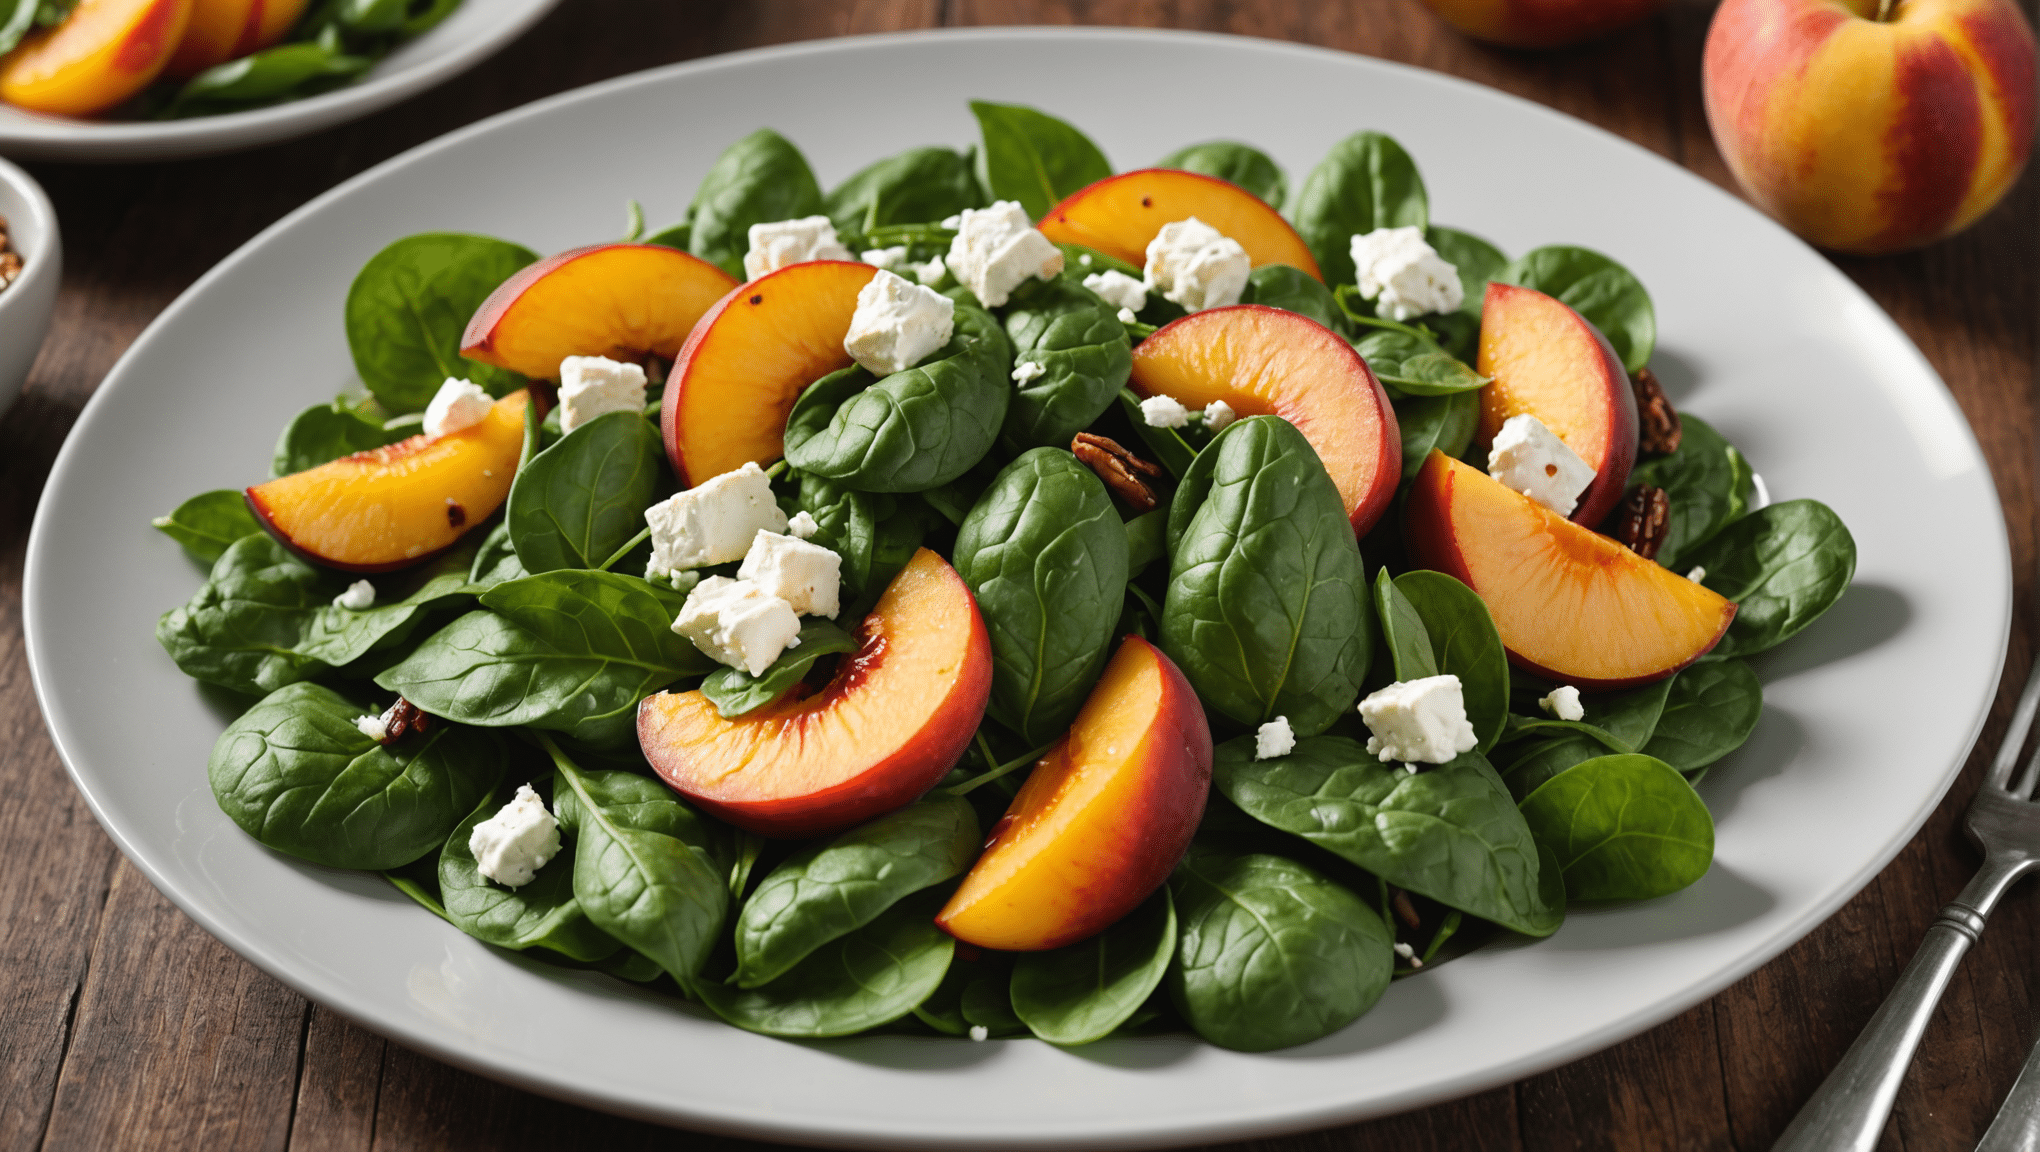 Spinach, Goat Cheese, and Nectarine Salad